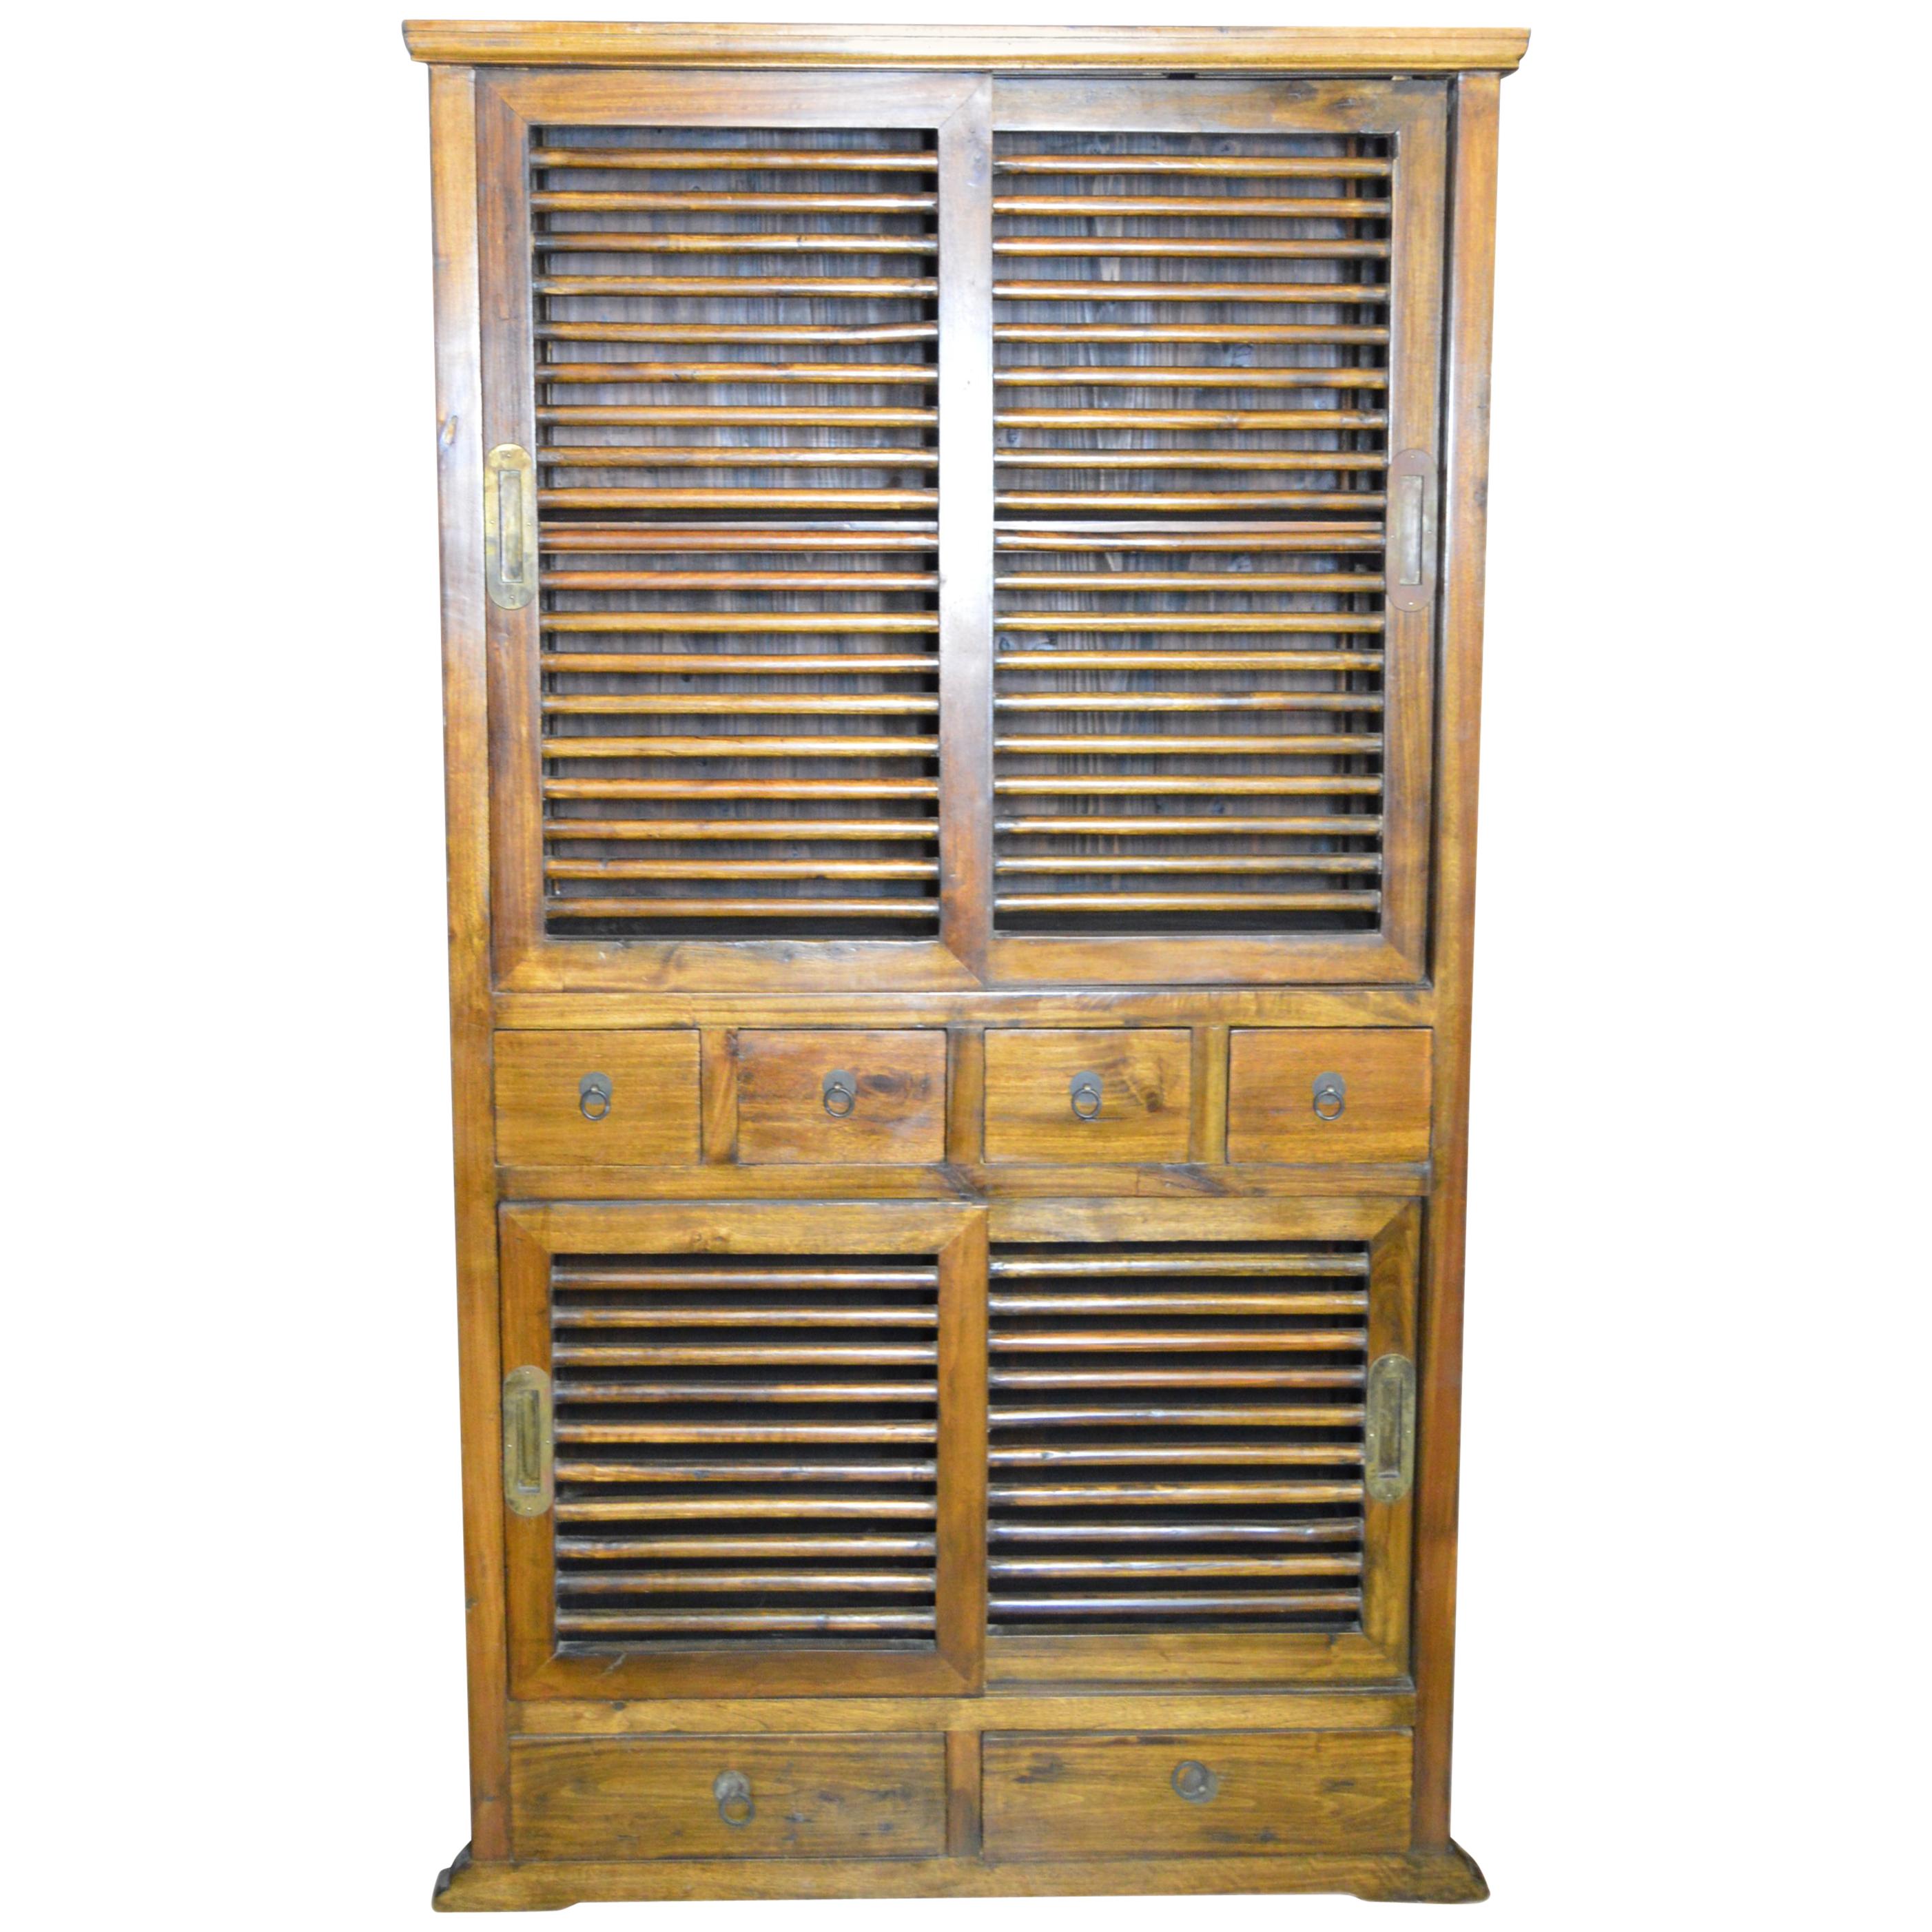 19th Century Dutch Colonial Armoire with Fretwork Sliding Doors and Drawers